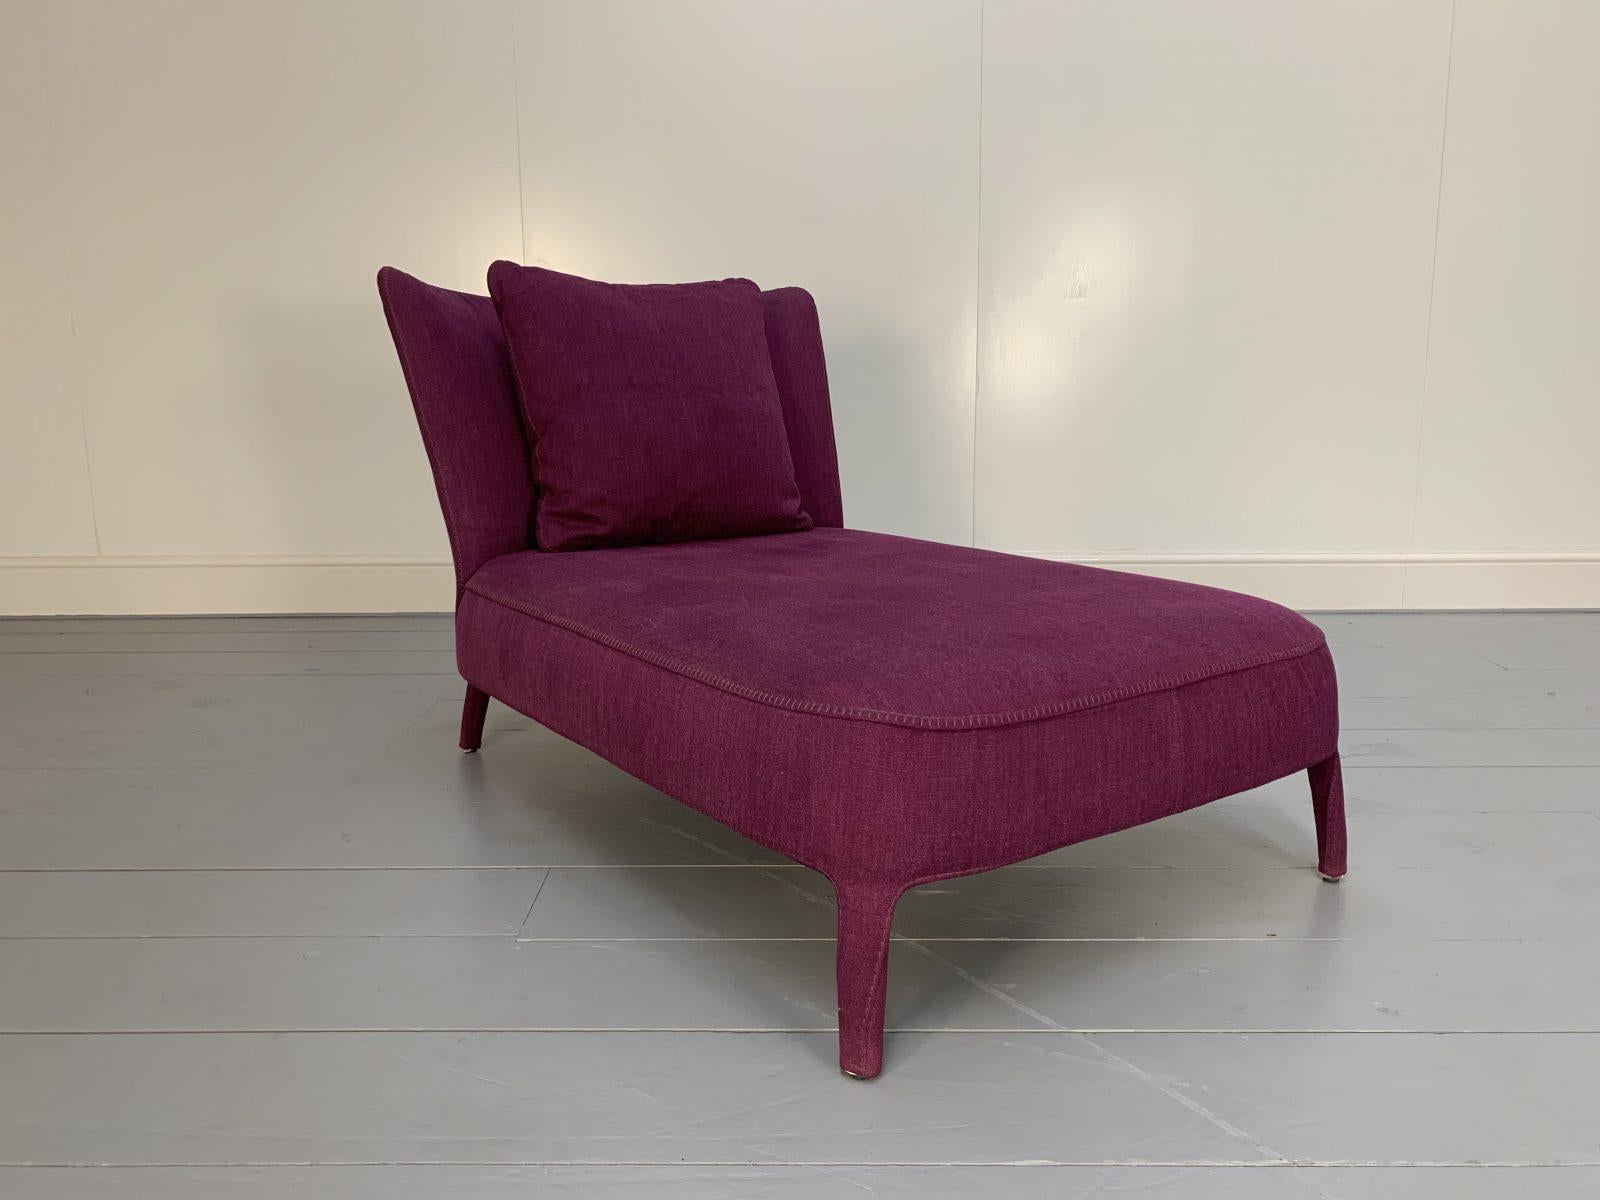 This is a superb, rare B&B Italia Maxalto “Febo 2807T” Chaise Longue dressed in a peerless, elegant woven-chenille “Enia 777” fabric in a pink-violet colour.

In a world of temporary pleasures, B&B Italia create beautiful furniture that remains a